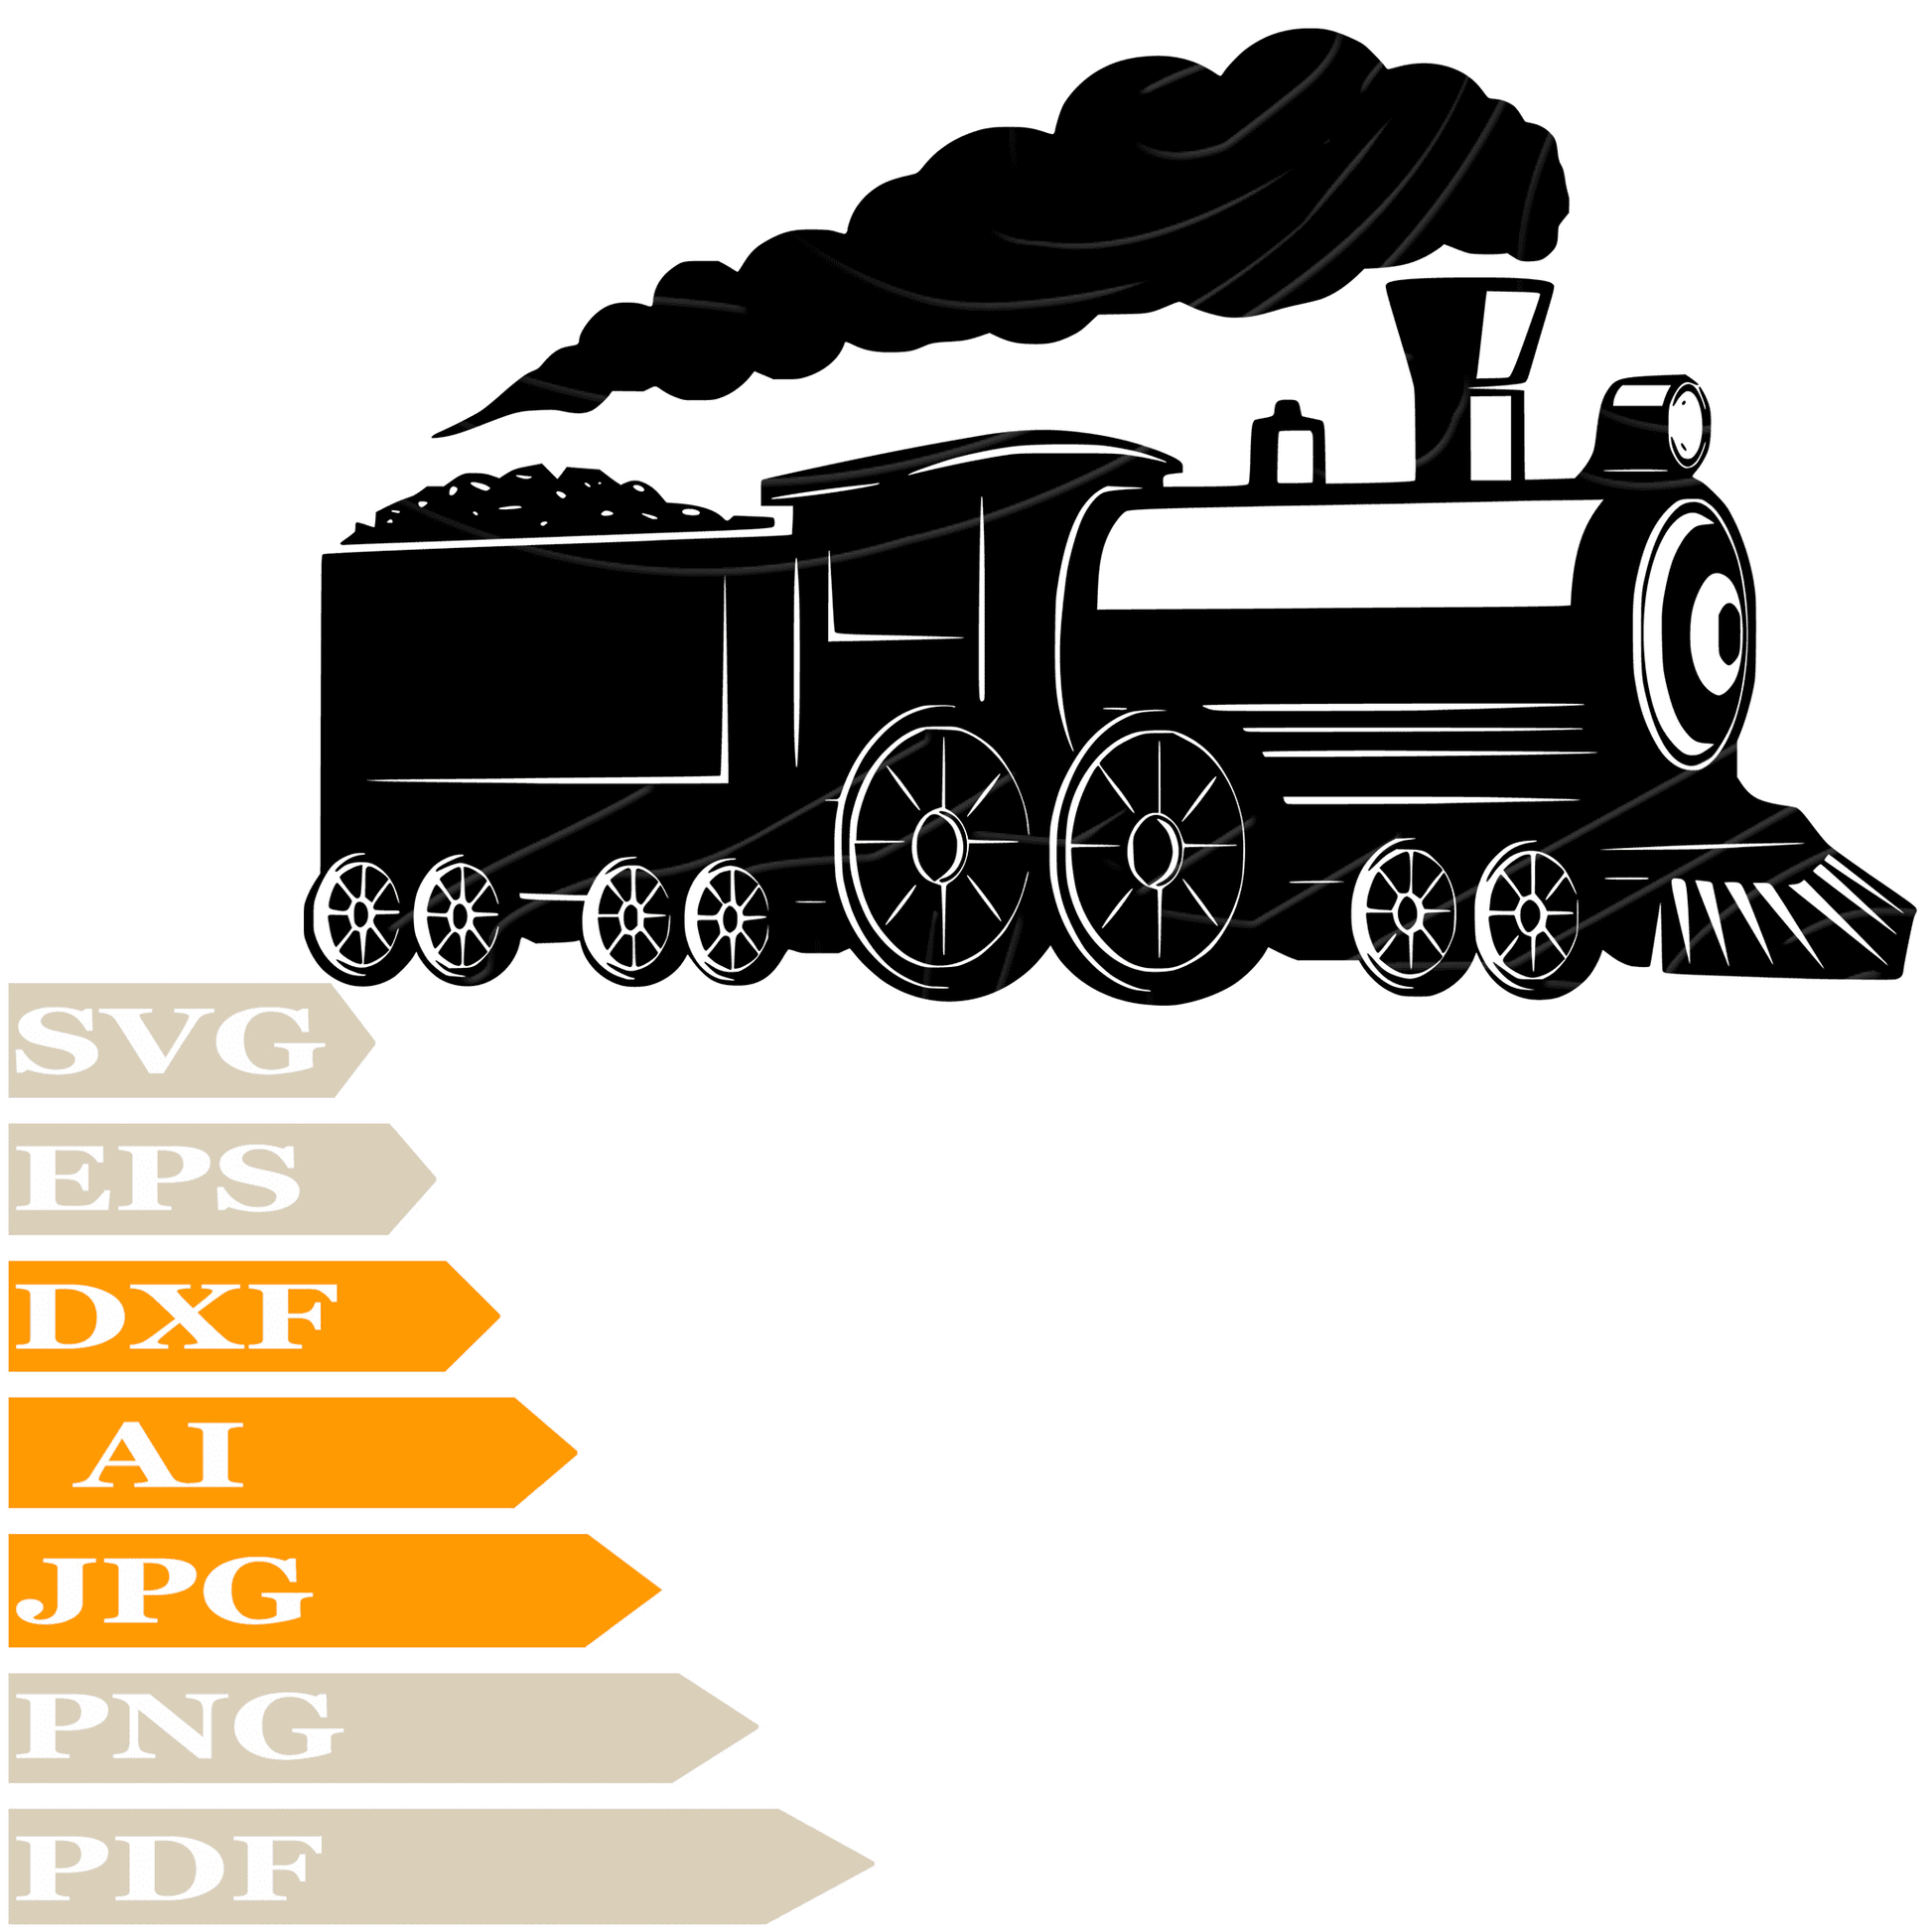 Train SVG, Locomotive SVG Design,  Railway Locomotive Vector, Old Fashioned Train PNG, Train For Cricut, Train Cut File,  Railway Locomotive For Tattoo Image Cut, Clipart, Print, Decal, Shirt